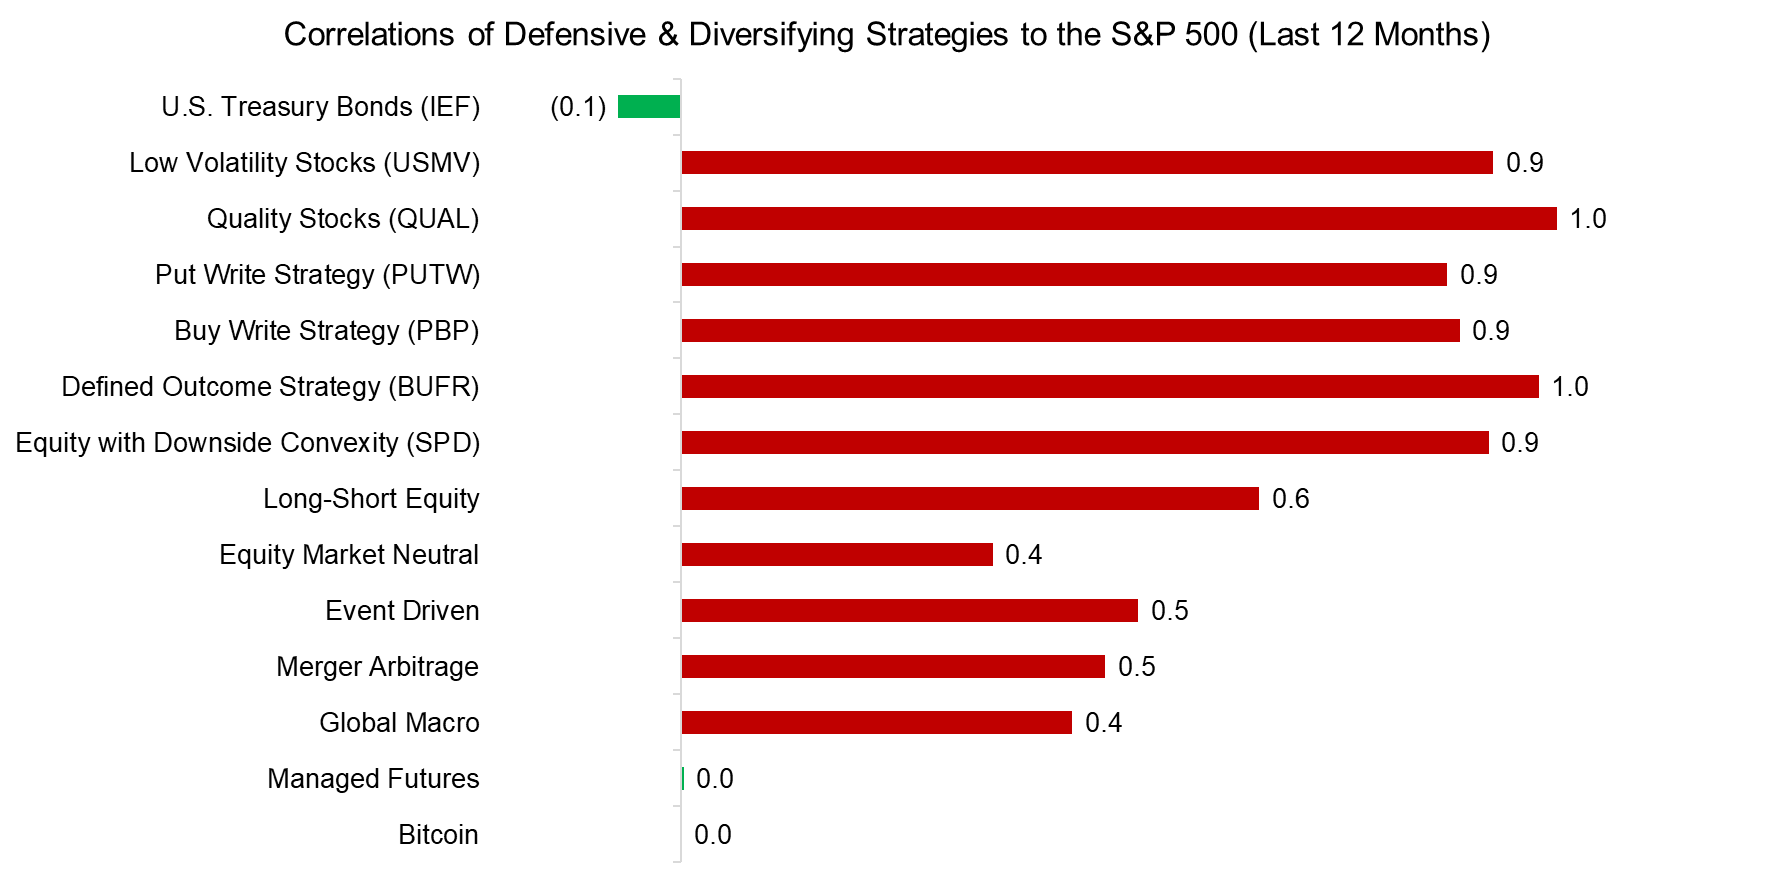 Correlations of Defensive & Diversifying Strategies to the S&P 500 (Last 12 Months)i